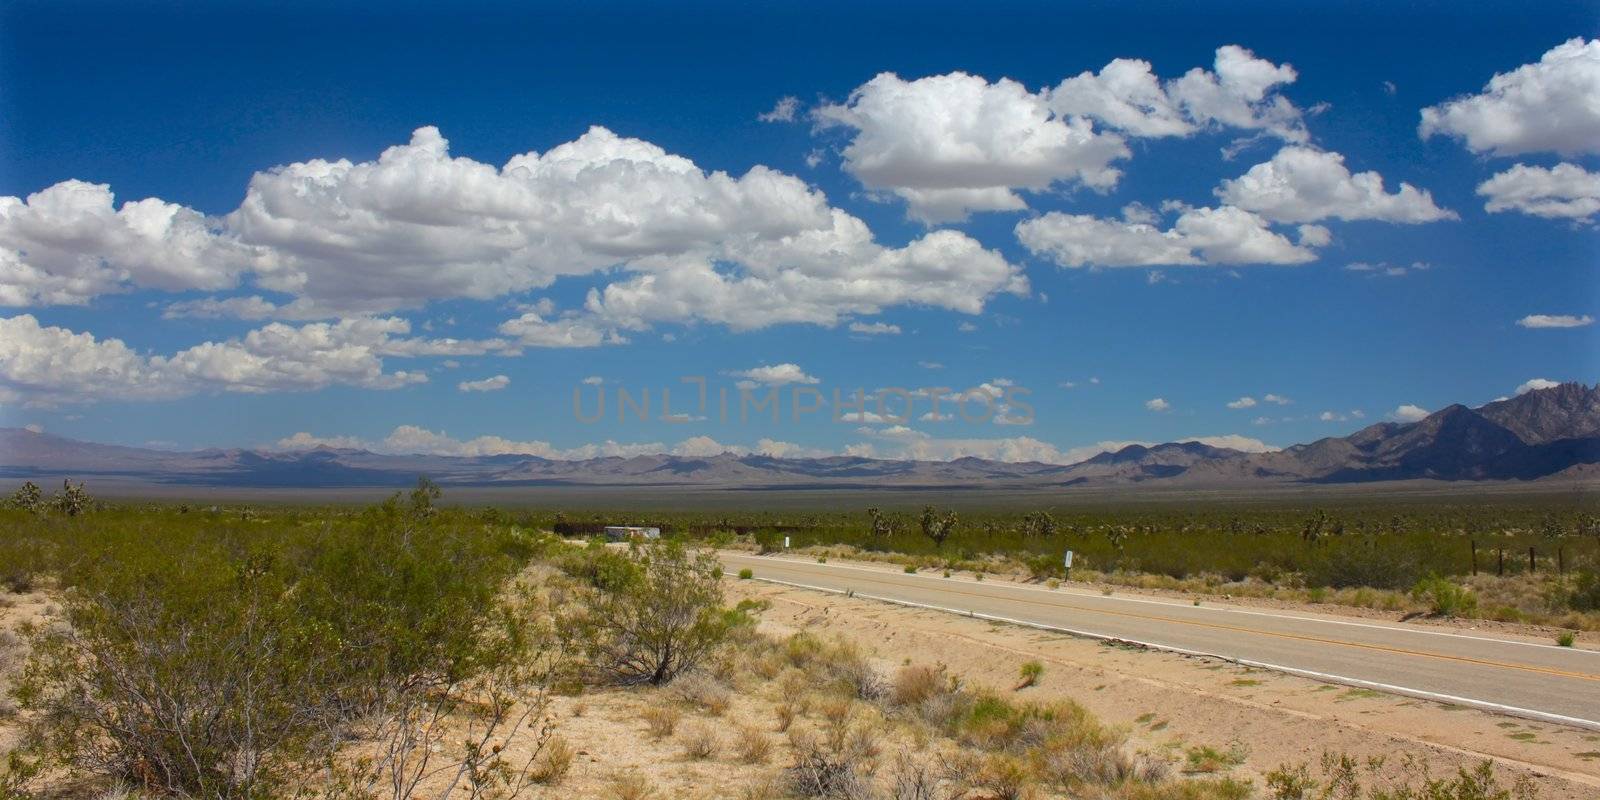 Mojave Desert - southern California by Wirepec